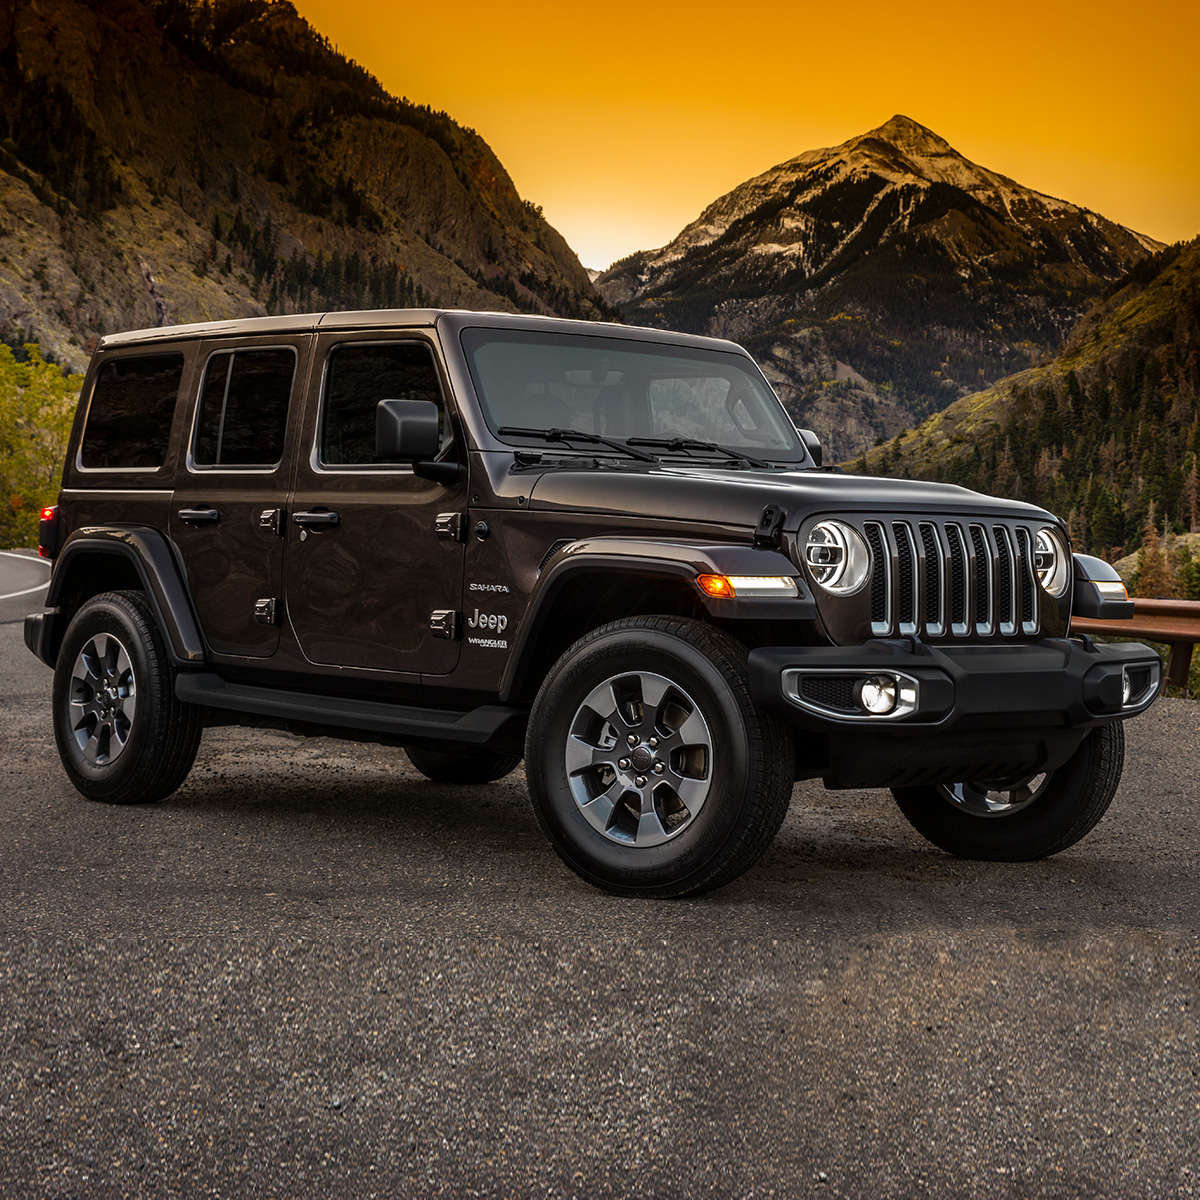 2020 Jeep Wrangler in black parked in a lot with mountains in the background